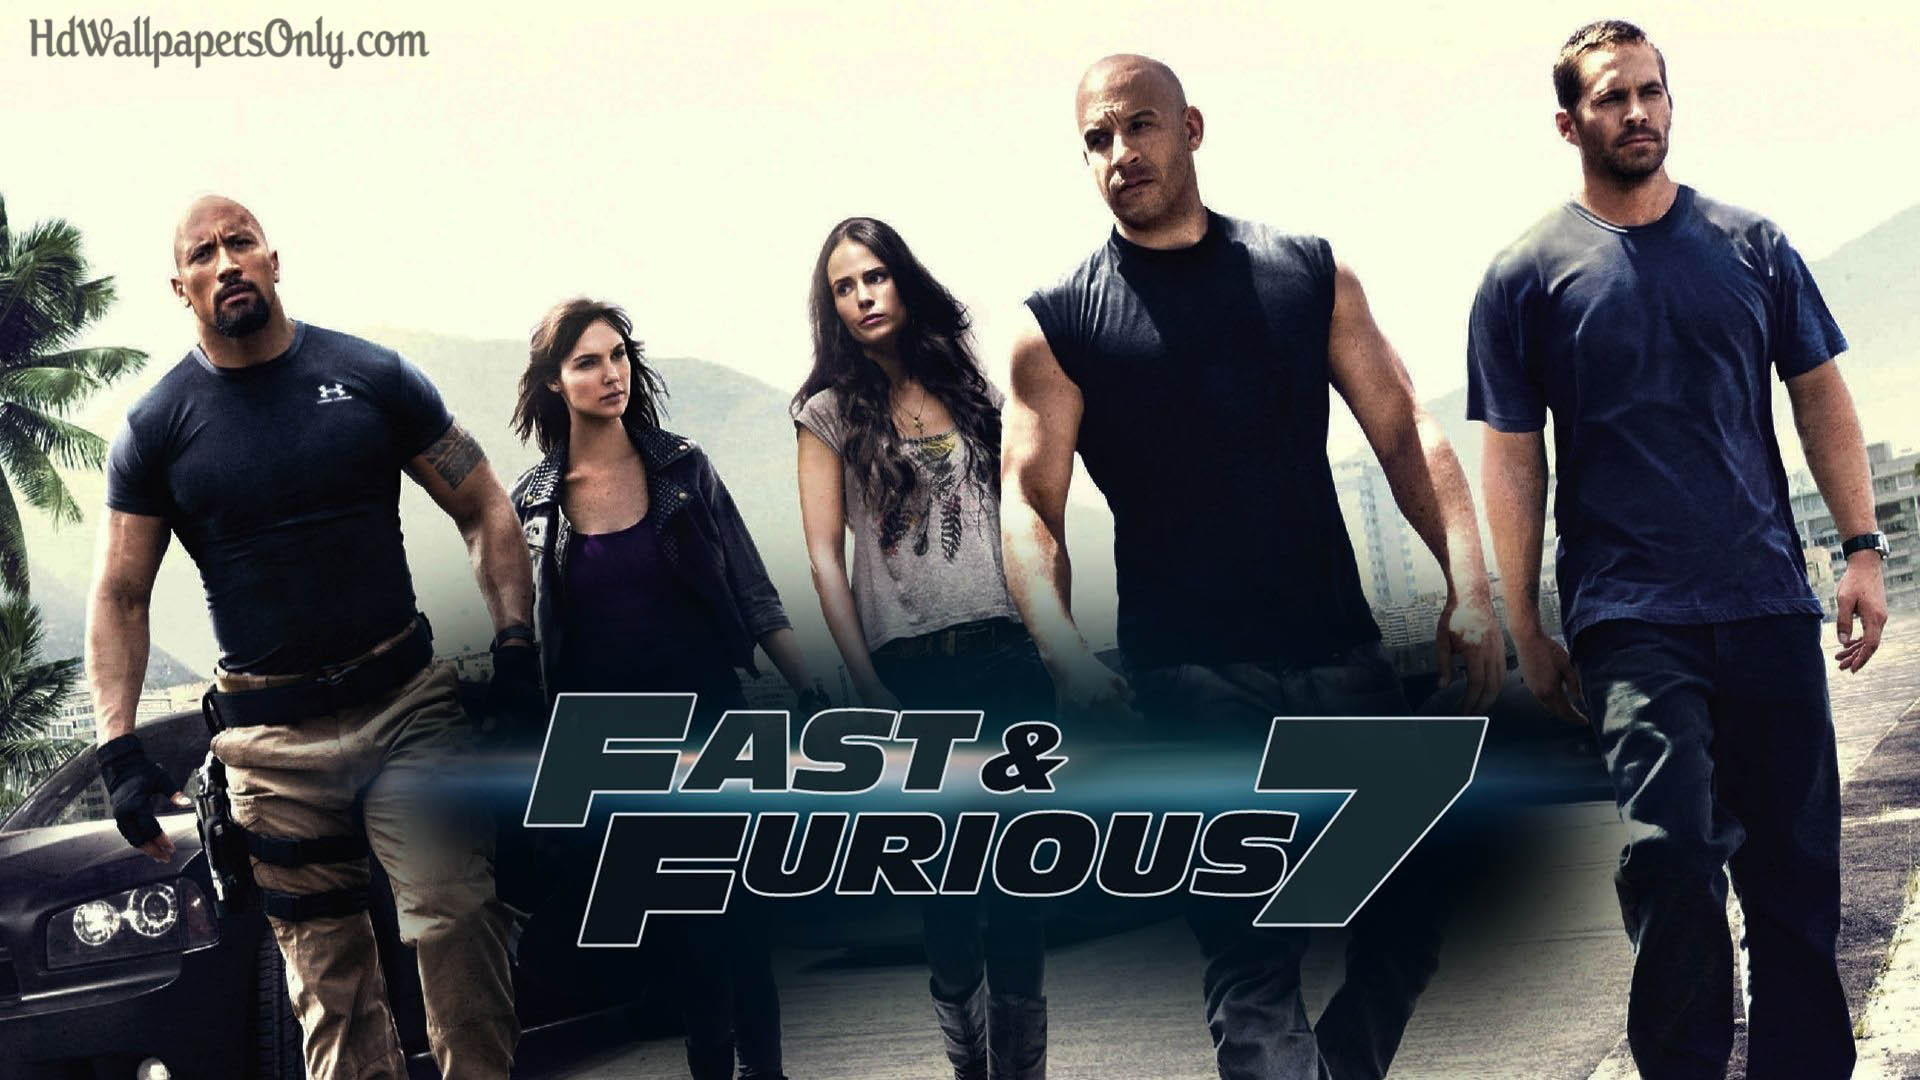 Fast And Furious HD Wallpaper For iPhone